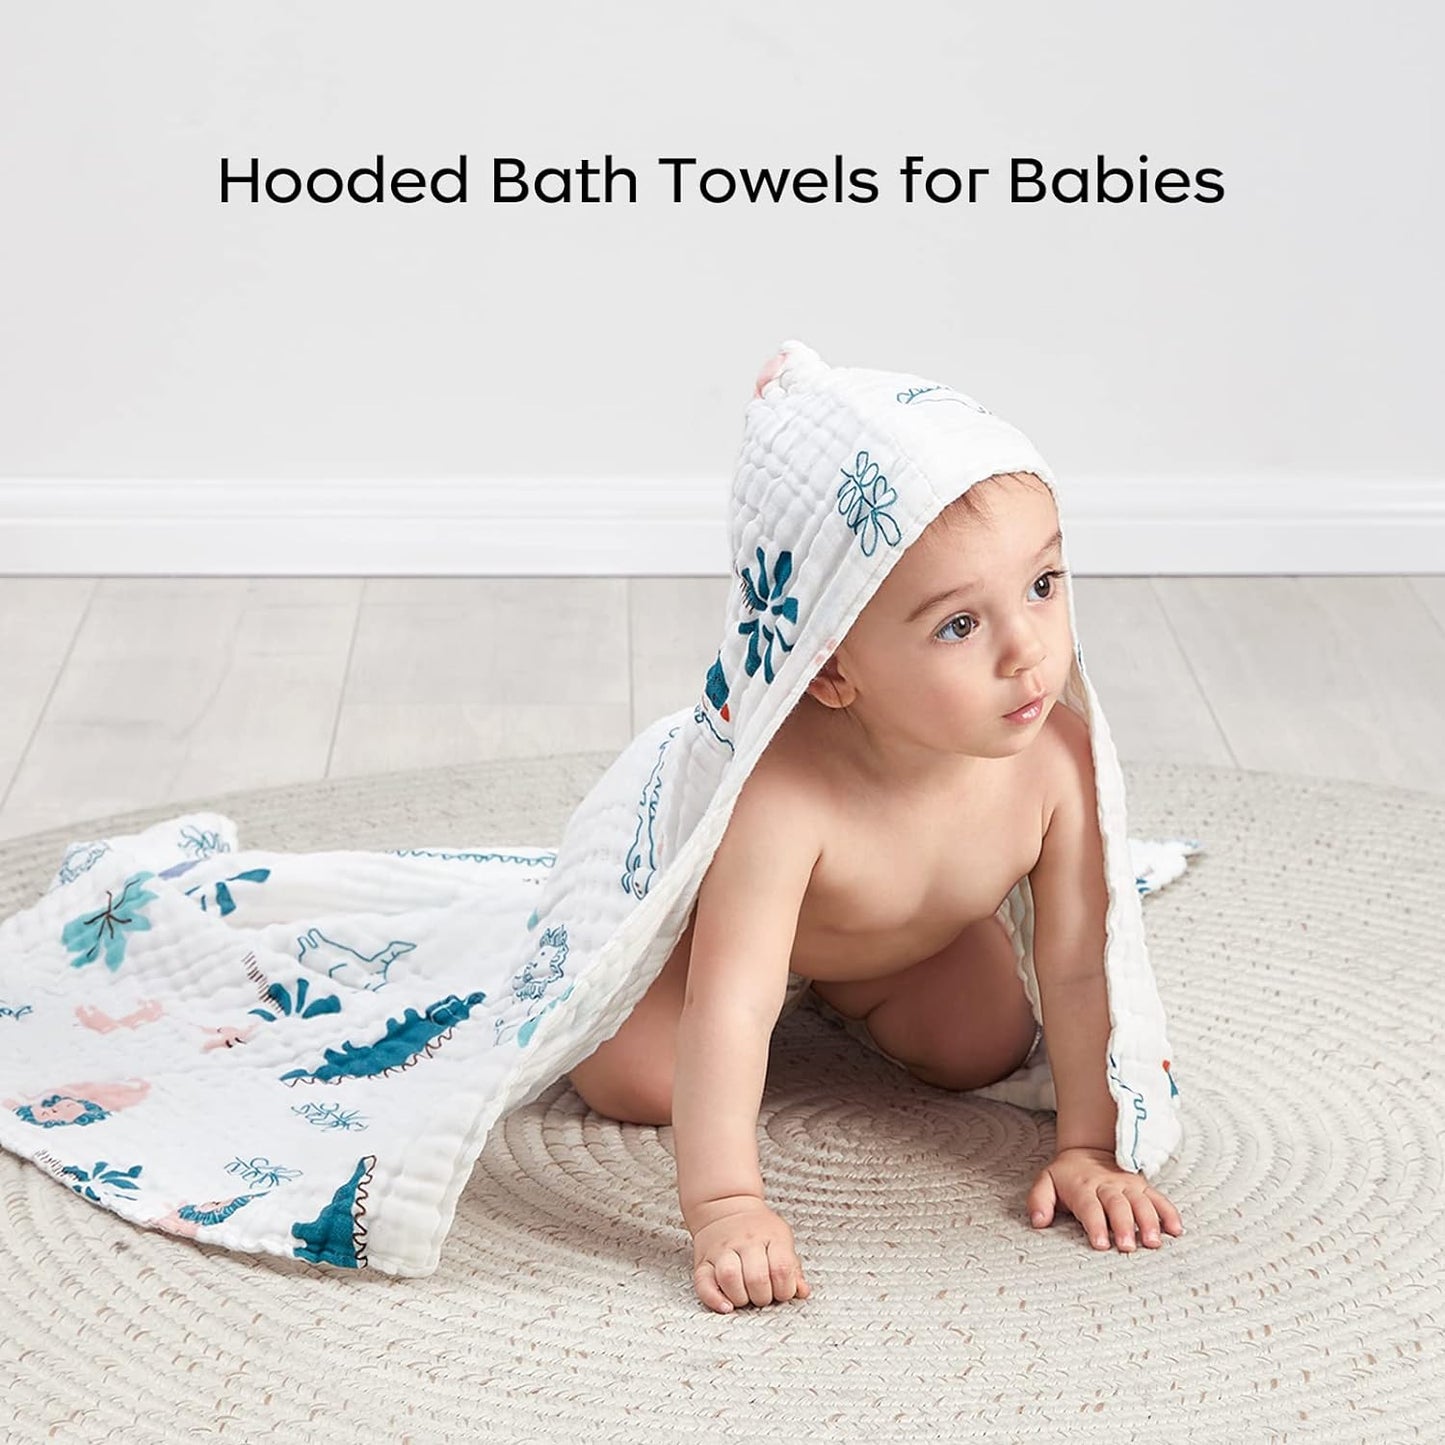 bc babycare Baby Bath Towel,100% Cotton Muslin Infant Towels, Baby Towels for Newborn Infant Bath Towels, Super Absorbent Hooded Baby Towels for Babies 2 Set, 37.4 * 37.4 Inch